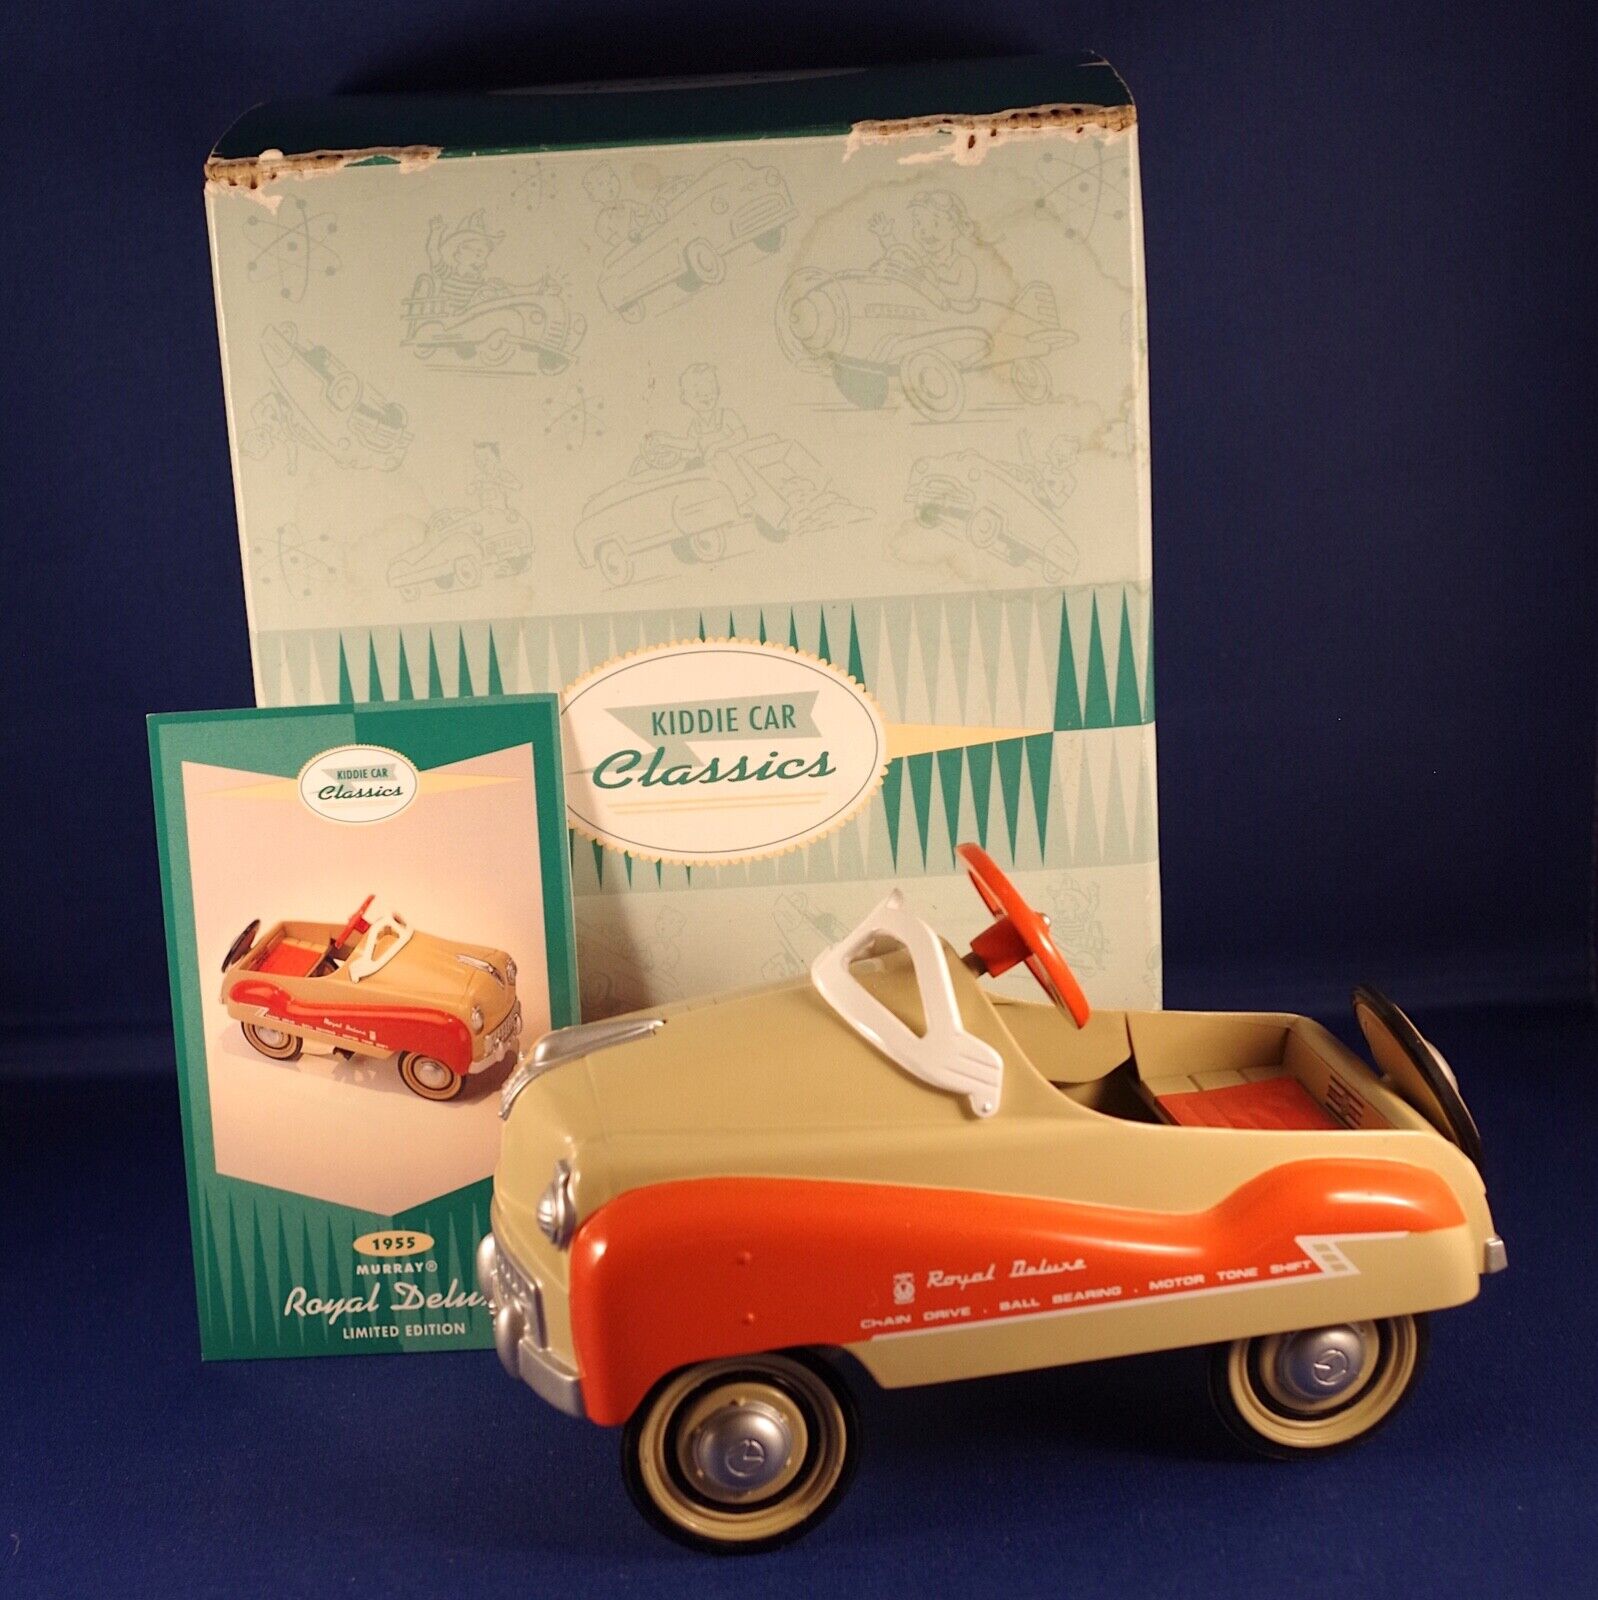 Hallmark Kiddie Car Classics 1955 Royal Deluxe Numbered Edition